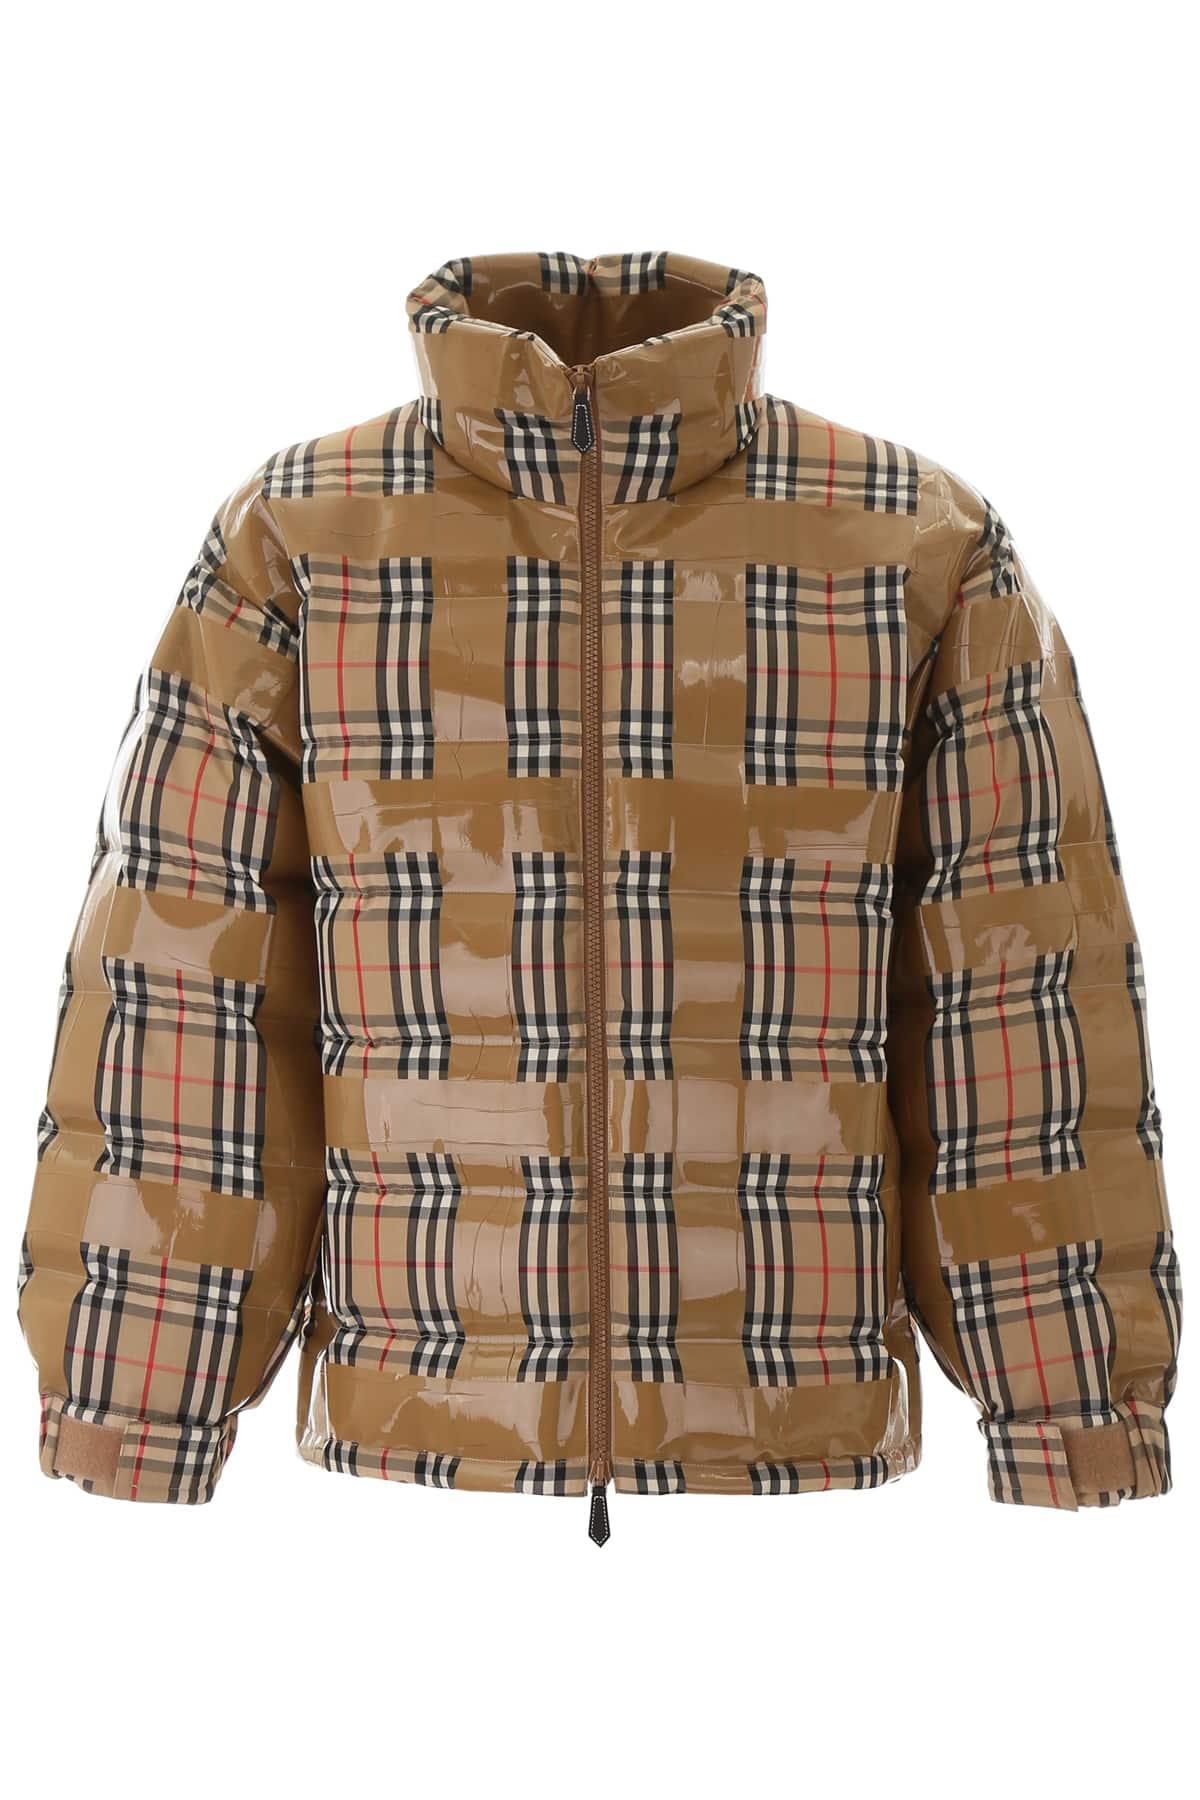 Burberry Tape Vintage Check Puffer Jacket in Natural for Men | Lyst